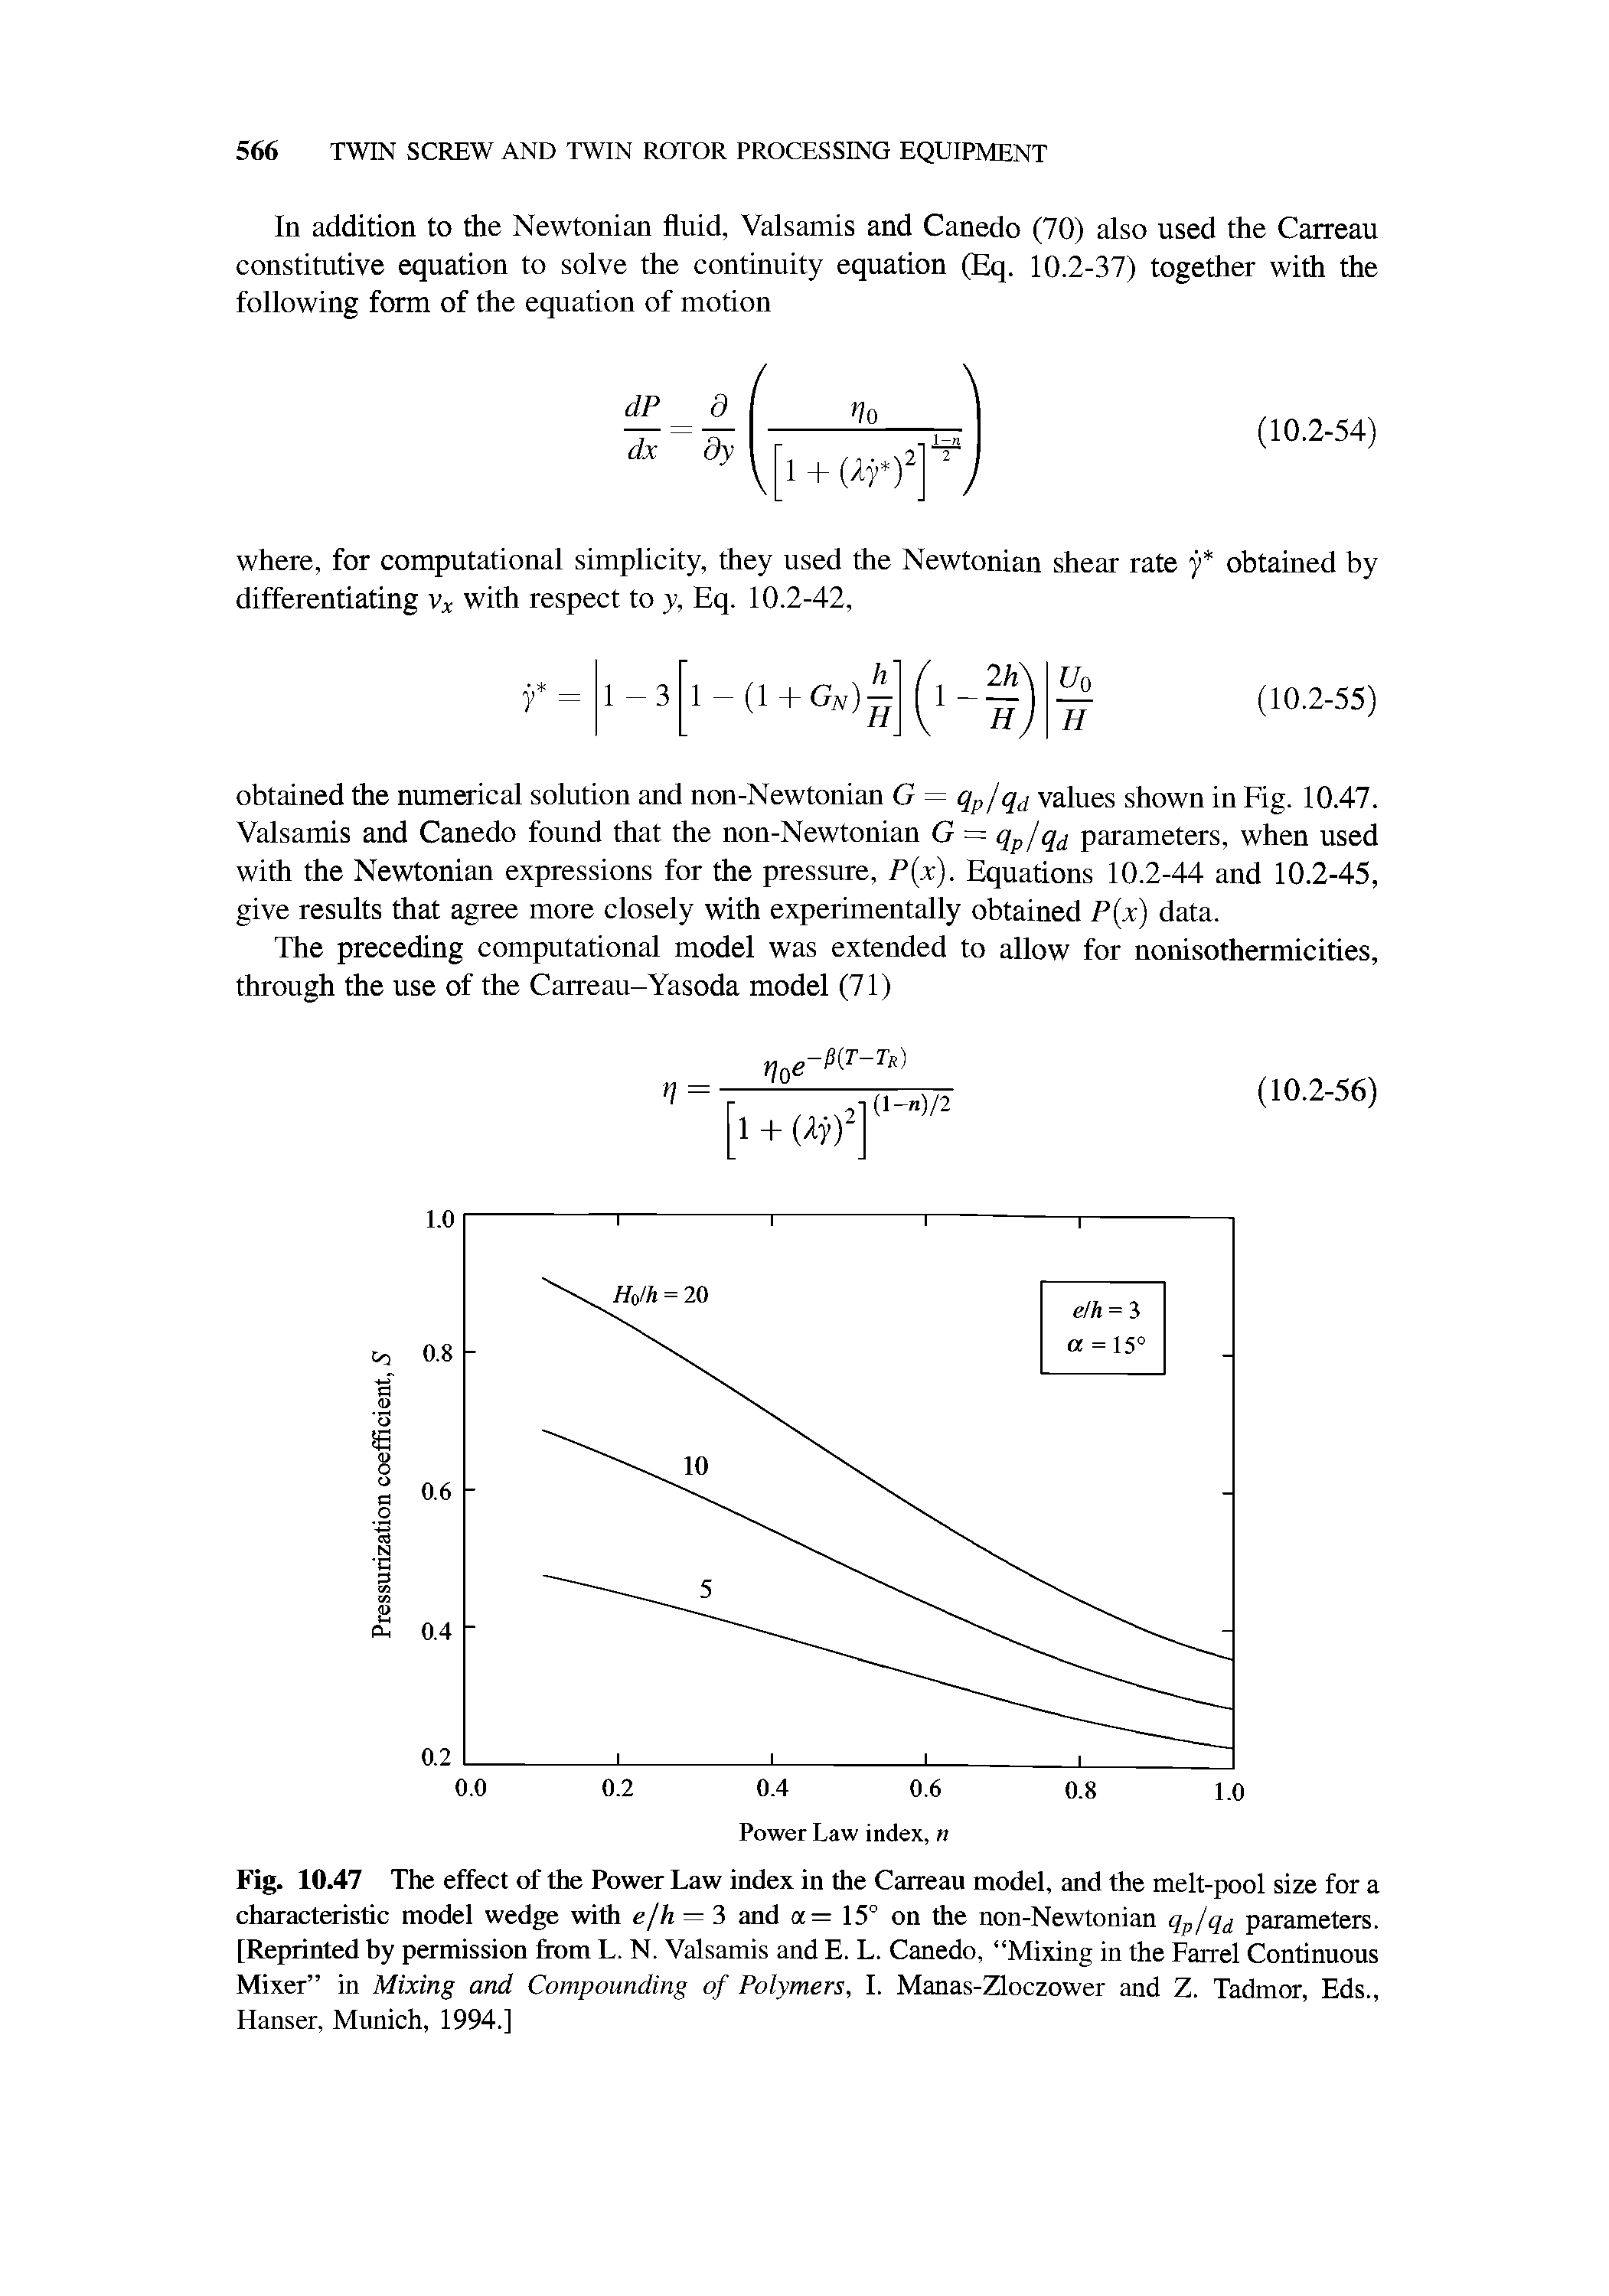 Fig. 10.47 The effect of the Power Law index in the Carreau model, and the melt-pool size for a characteristic model wedge with e/h — 3 and ot= 15° on the non-Newtonian qp/qd parameters. [Reprinted hy permission from L. N. Valsamis and E. L. Canedo, Mixing in the Farrel Continuous Mixer in Mixing and Compounding of Polymers, I. Manas-Zloczower and Z. Tadmor, Eds., Hanser, Munich, 1994.]...